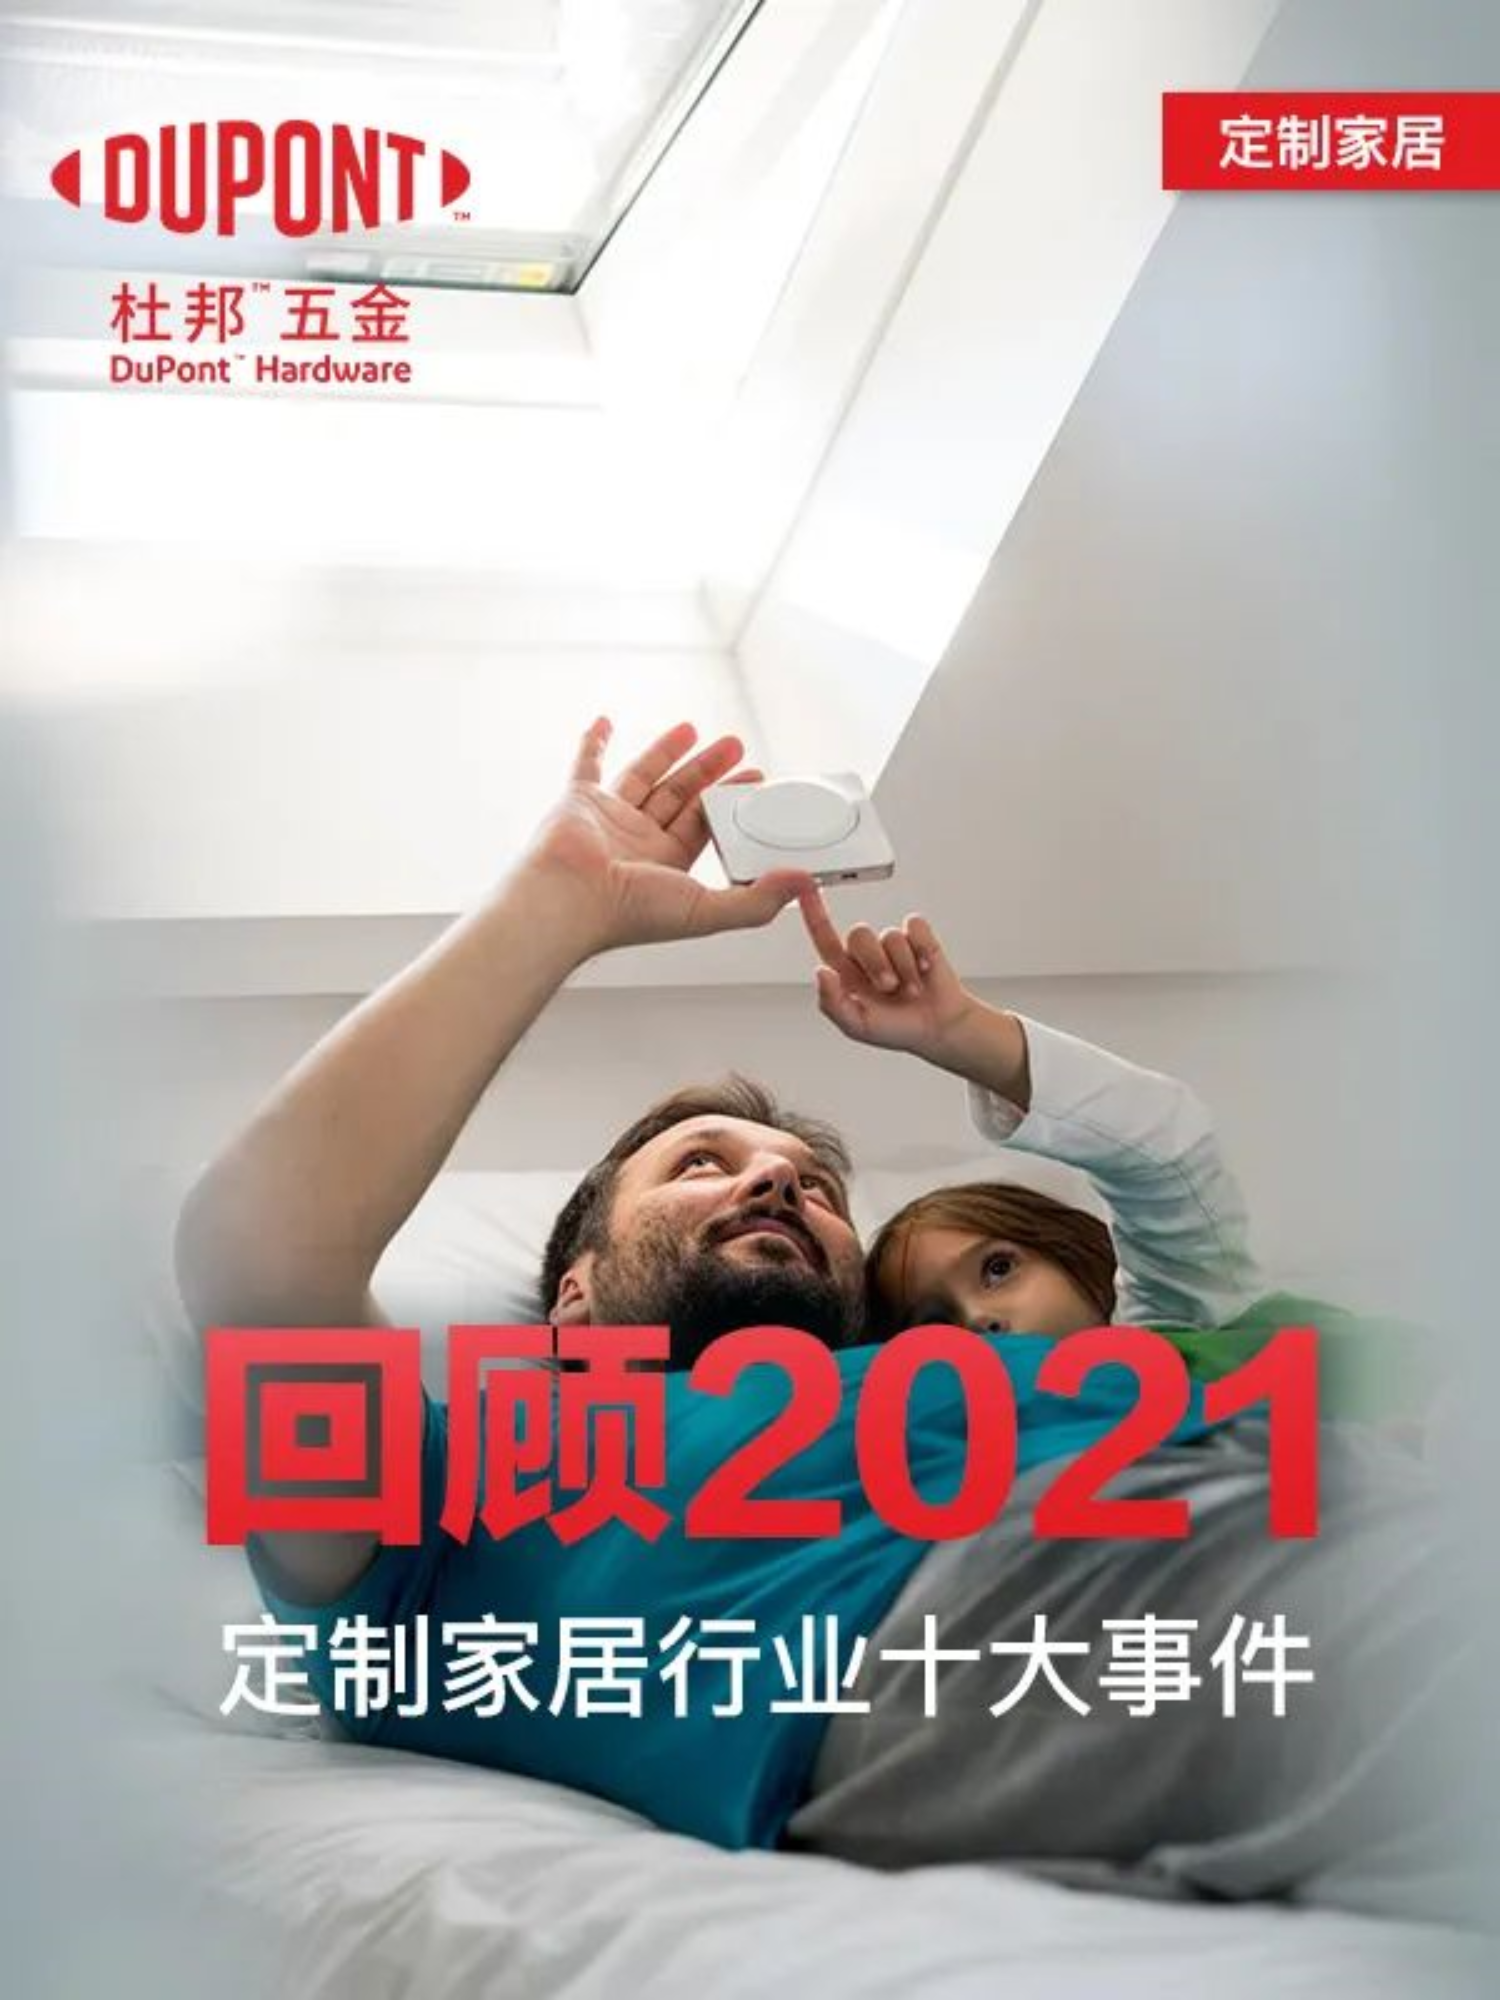 Review of the Top 10 Customized Home Furnishings in China in 2021!